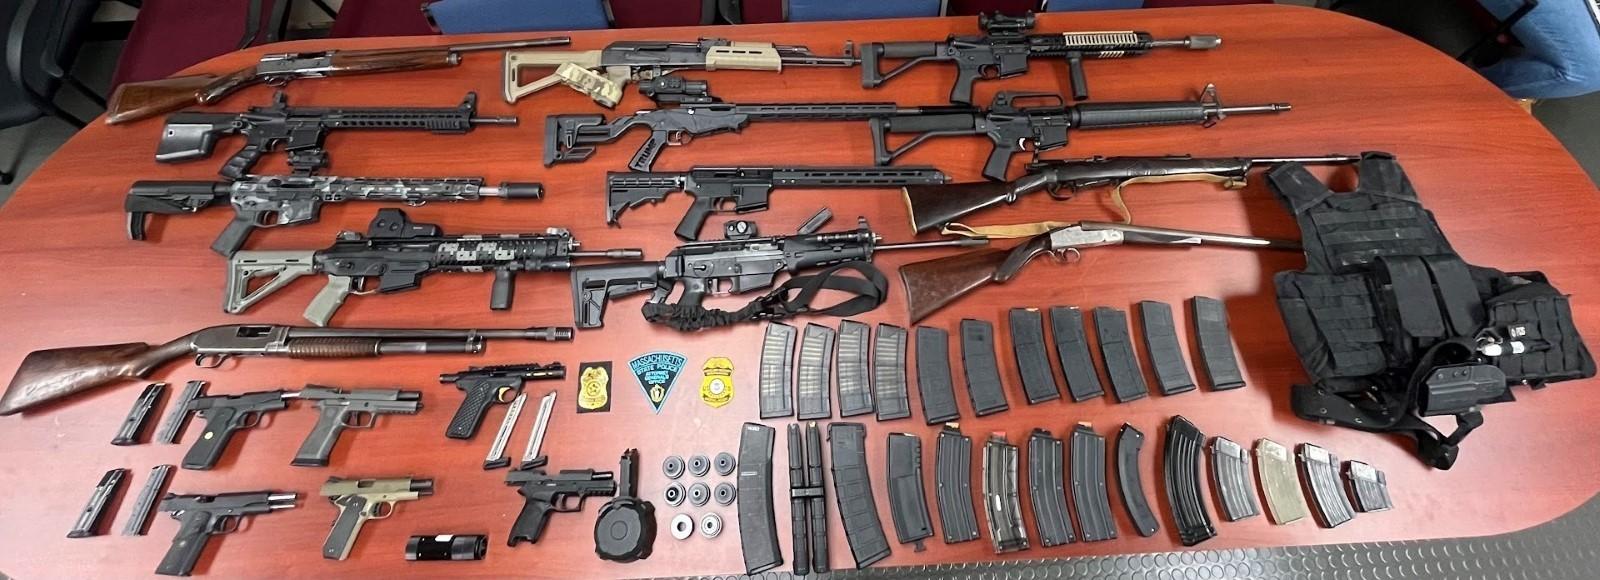 Guns on the table include: 7 AR-15 style rifles, 1 AK-47 rifle, 1 .22 bolt action rifle, 3 shotguns, 1 .303 bolt action rifle, 8 handguns, 23 large capacity magazines capable of holding more than 10 rounds of ammunition, 2 silencers, and hundreds of rounds of various caliber ammunition